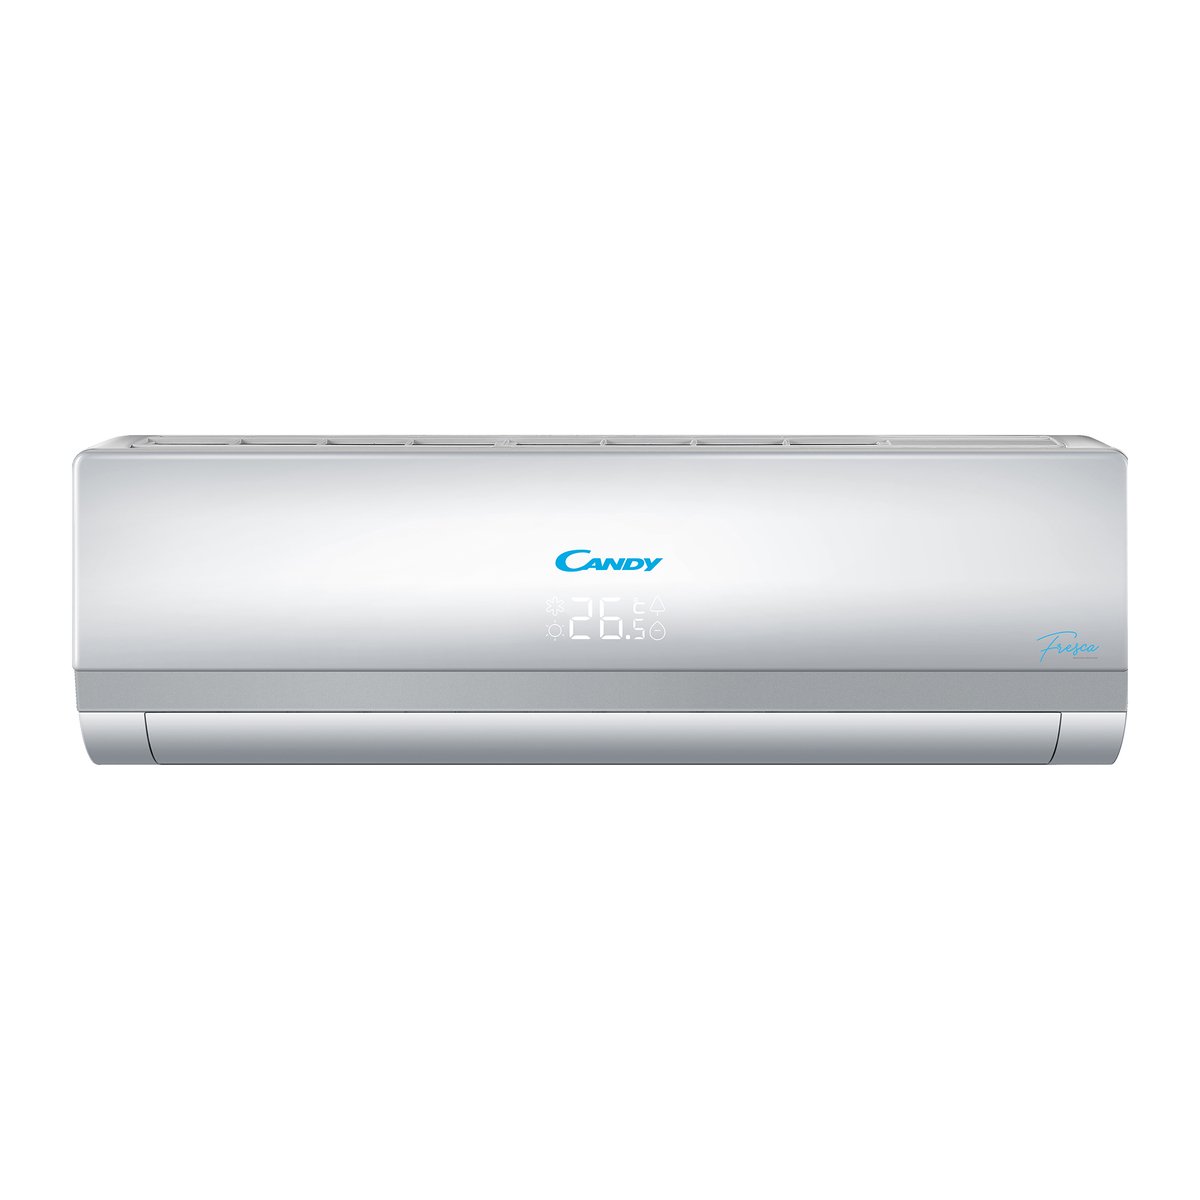 Candy Split Air Conditioner 1IS18RC3 1.5Ton